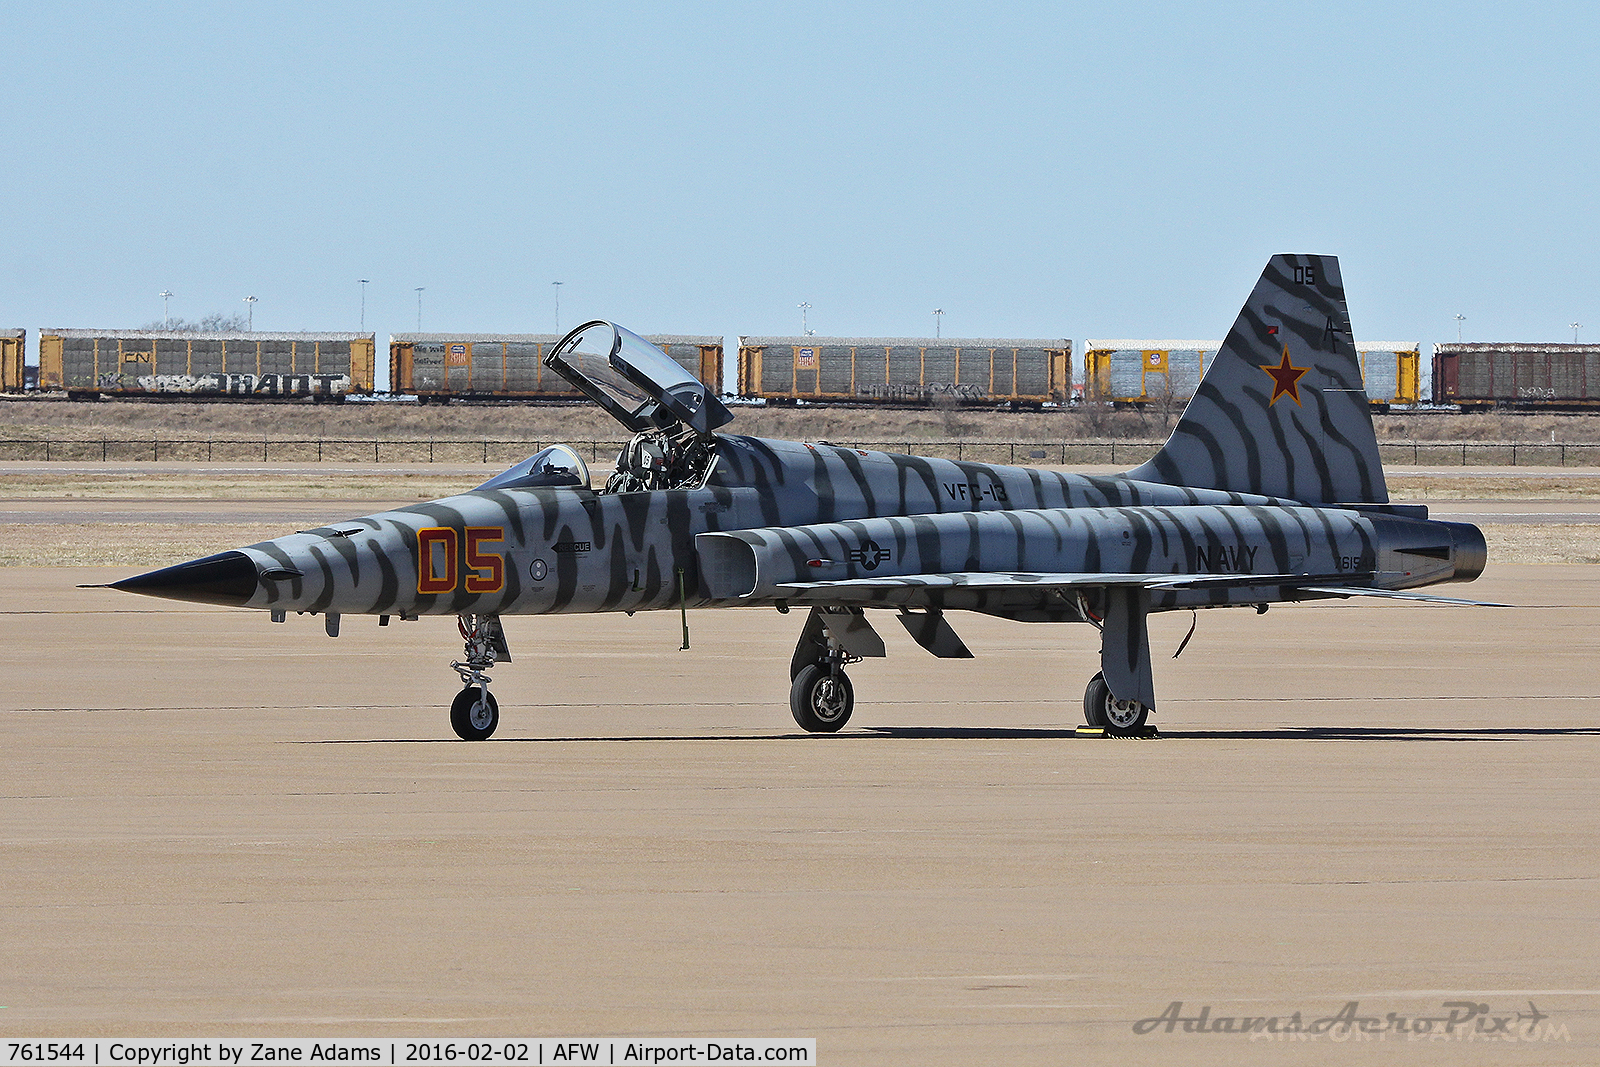 761544, Northrop F-5N Tiger II C/N L.1019, On the ramp at Alliance Airport - Fort Worth, TX